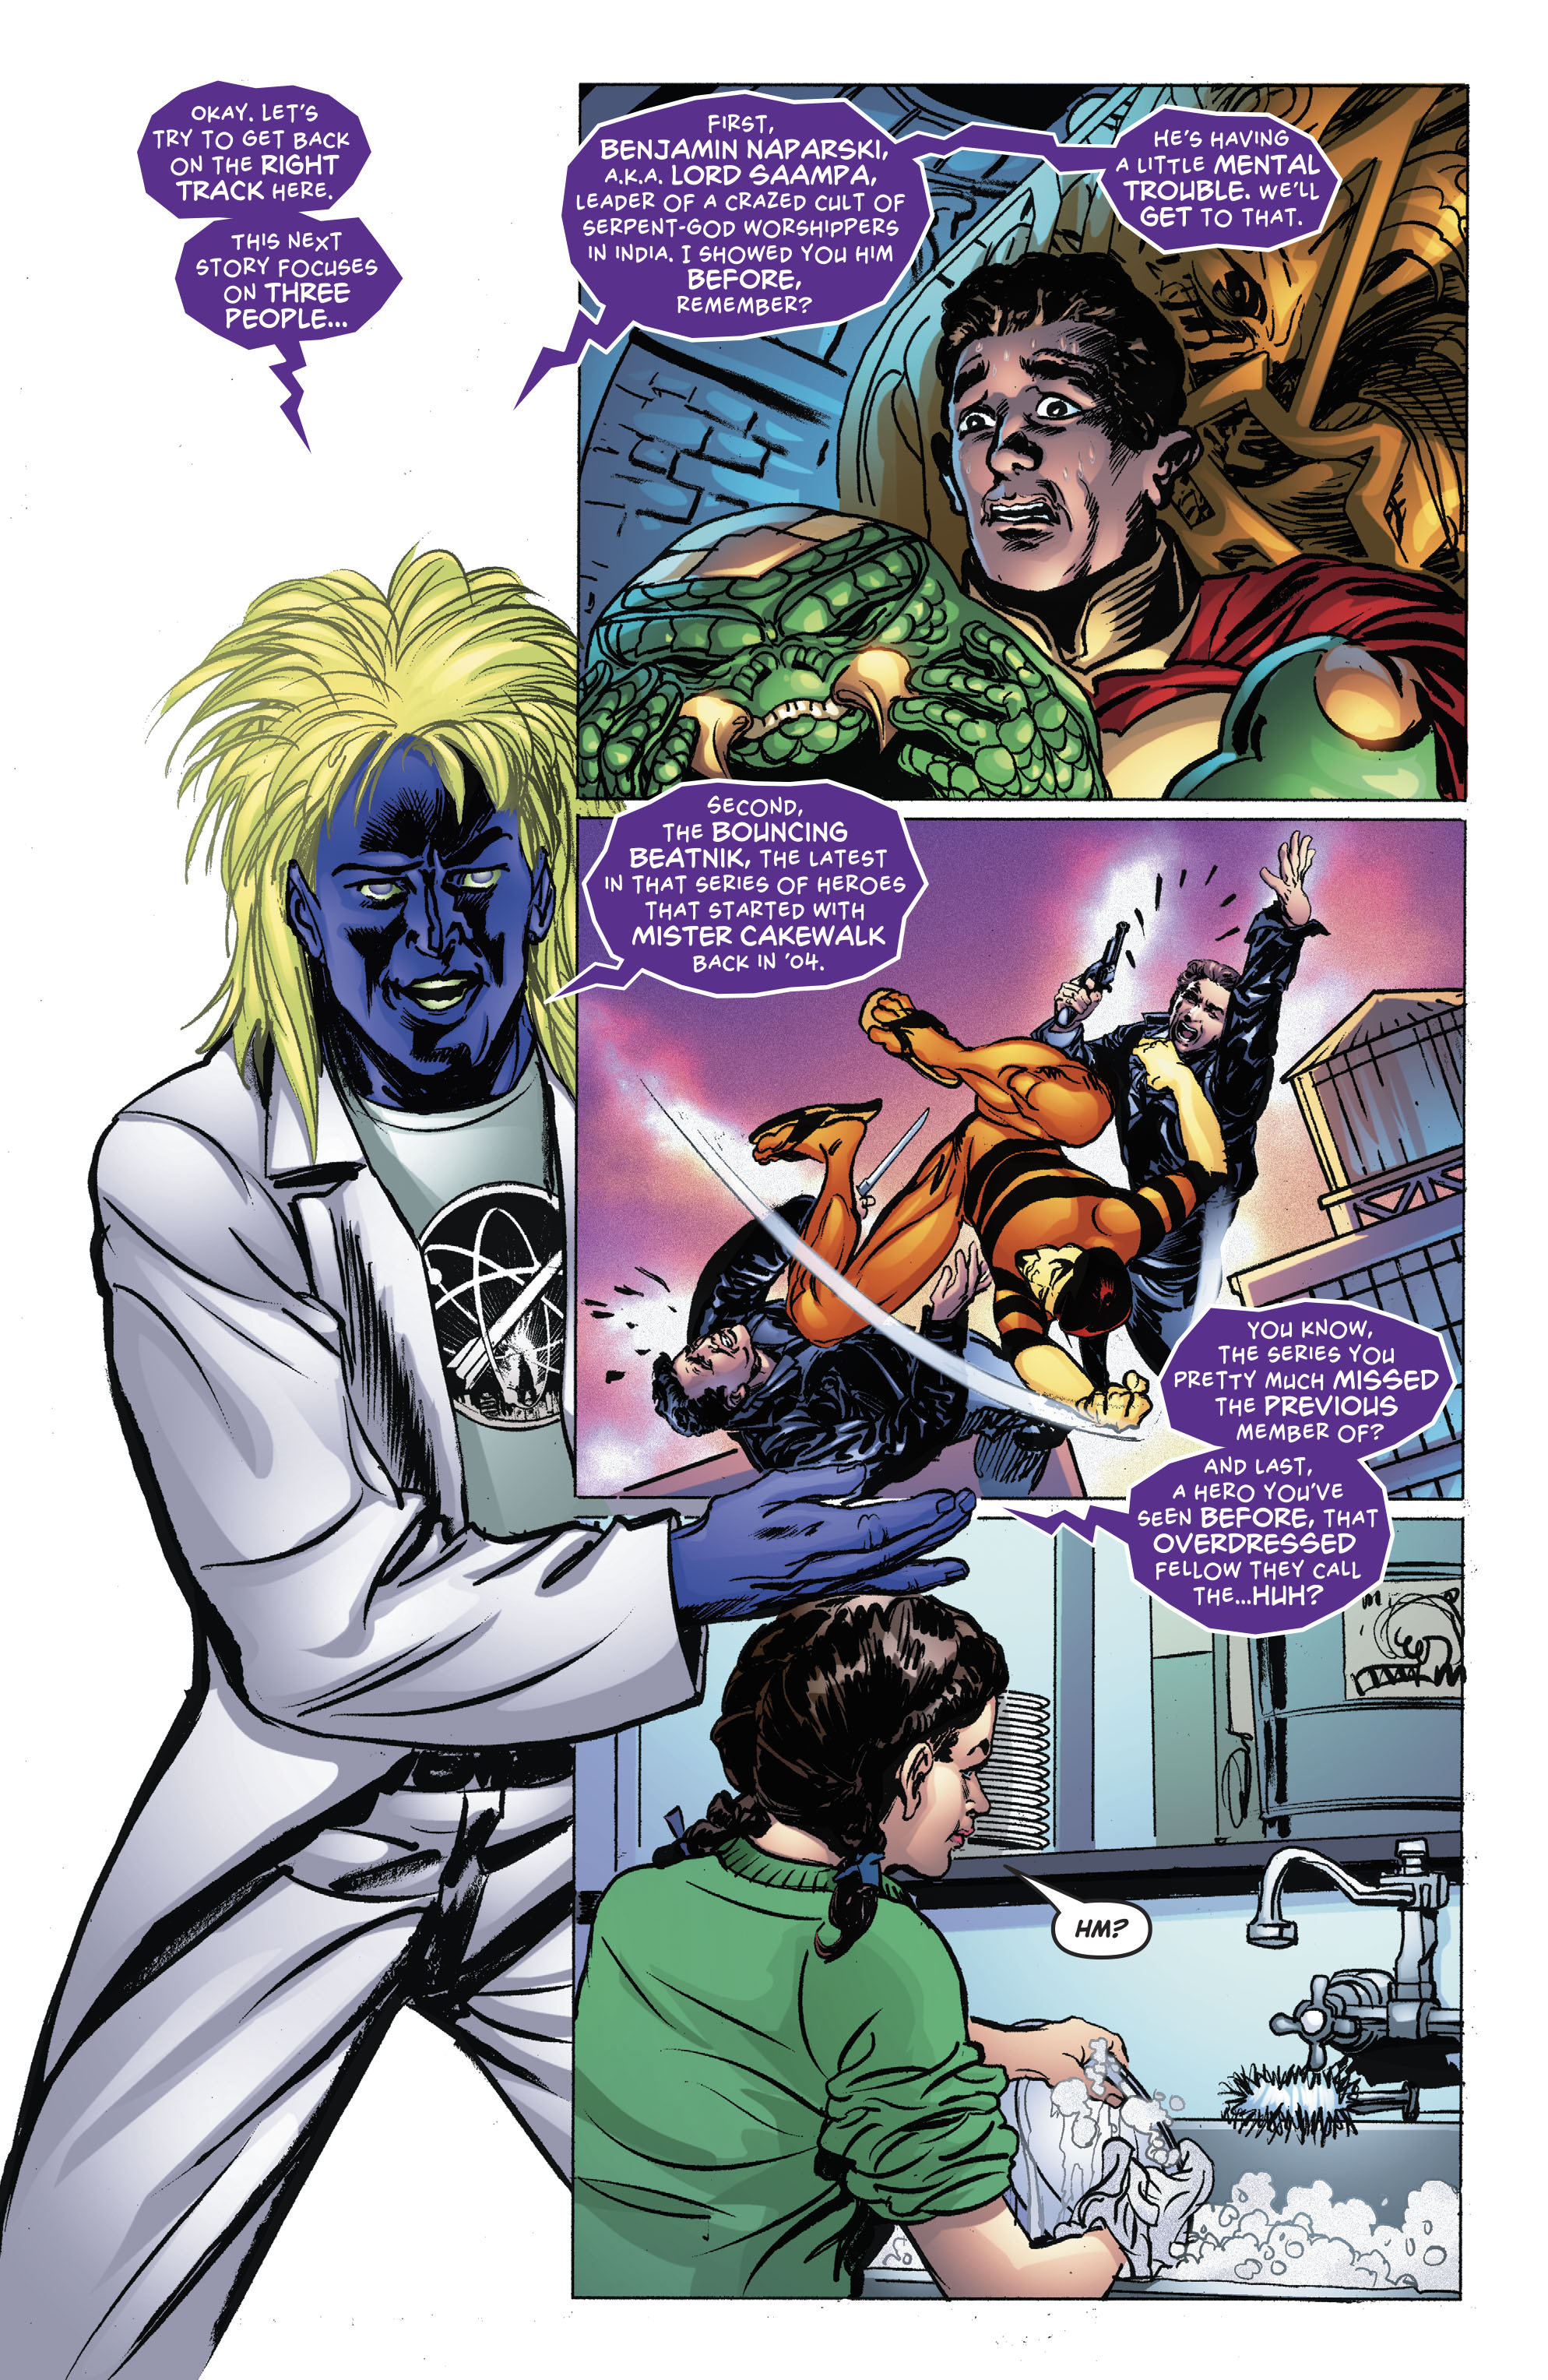 Astro City (2013-): Chapter 43 - Page 2